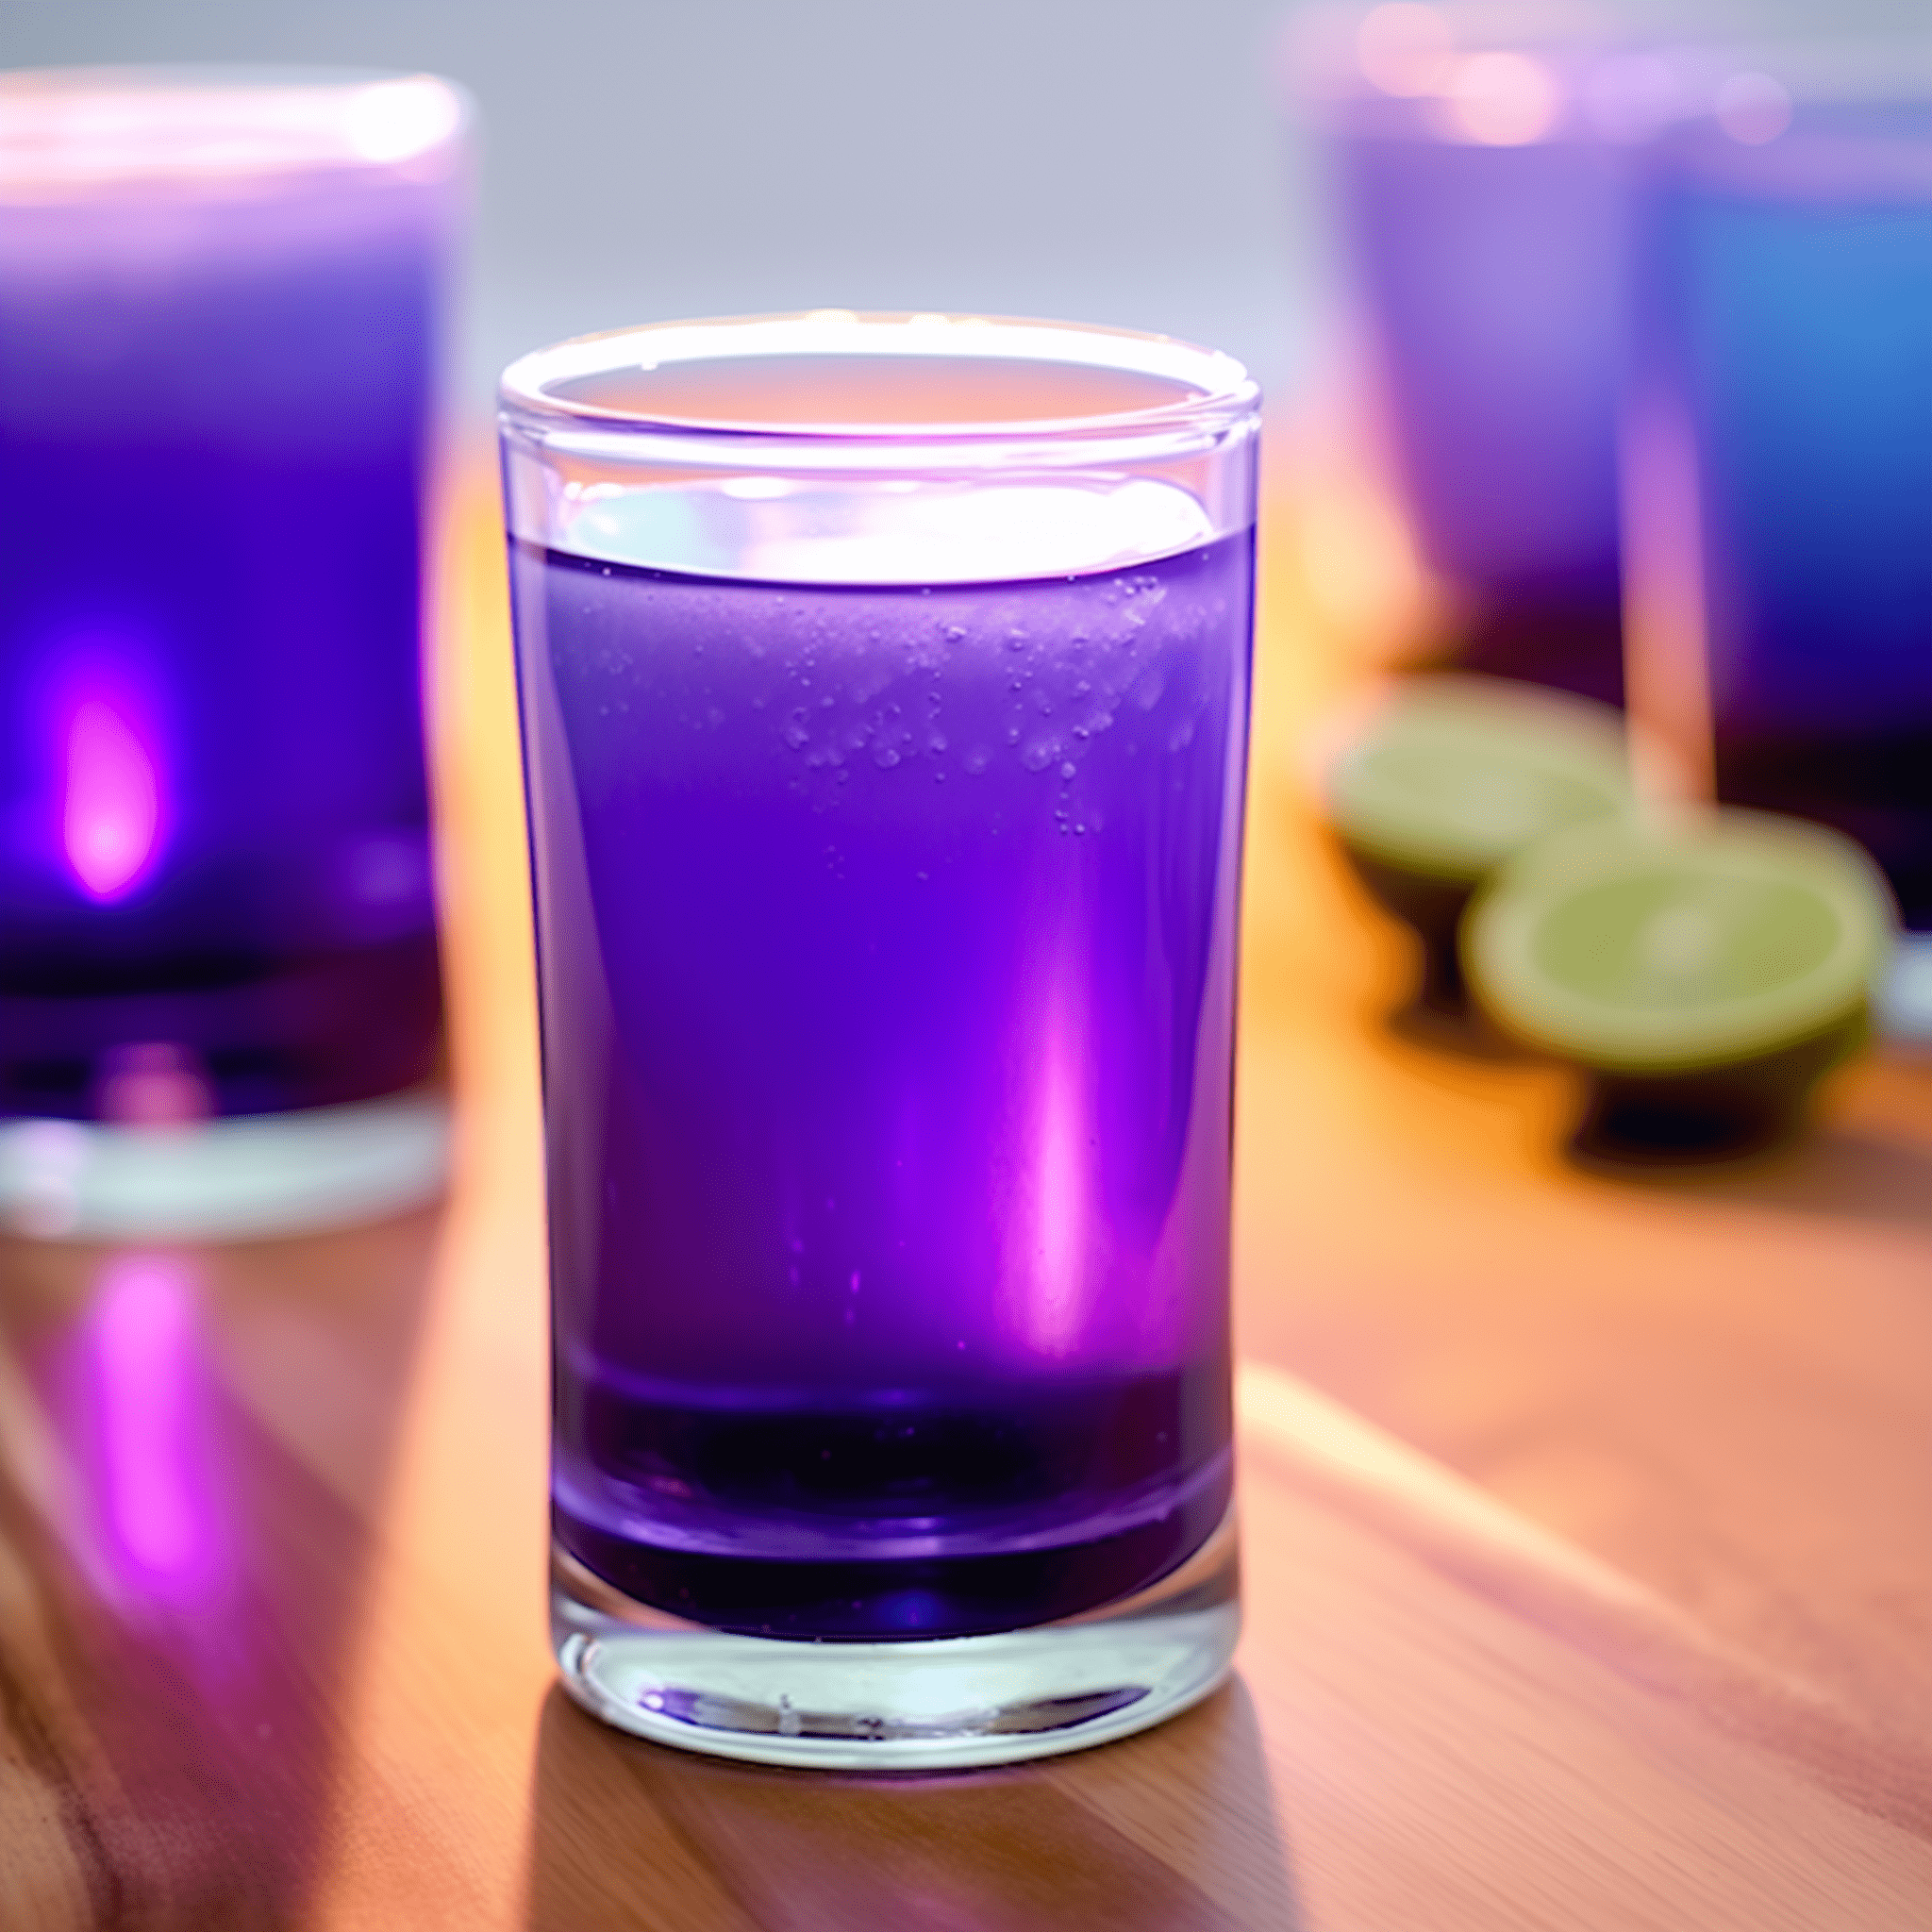 Purple Gecko Recipe - The Purple Gecko is a delightful mix of sweet and sour with a tequila base that provides a warm, spirited kick. The blue curacao adds a citrusy depth, while the lime juice brings a zesty tang. Cranberry juice offers a fruity sweetness that balances the sour mix, creating a shot that's both refreshing and bold.